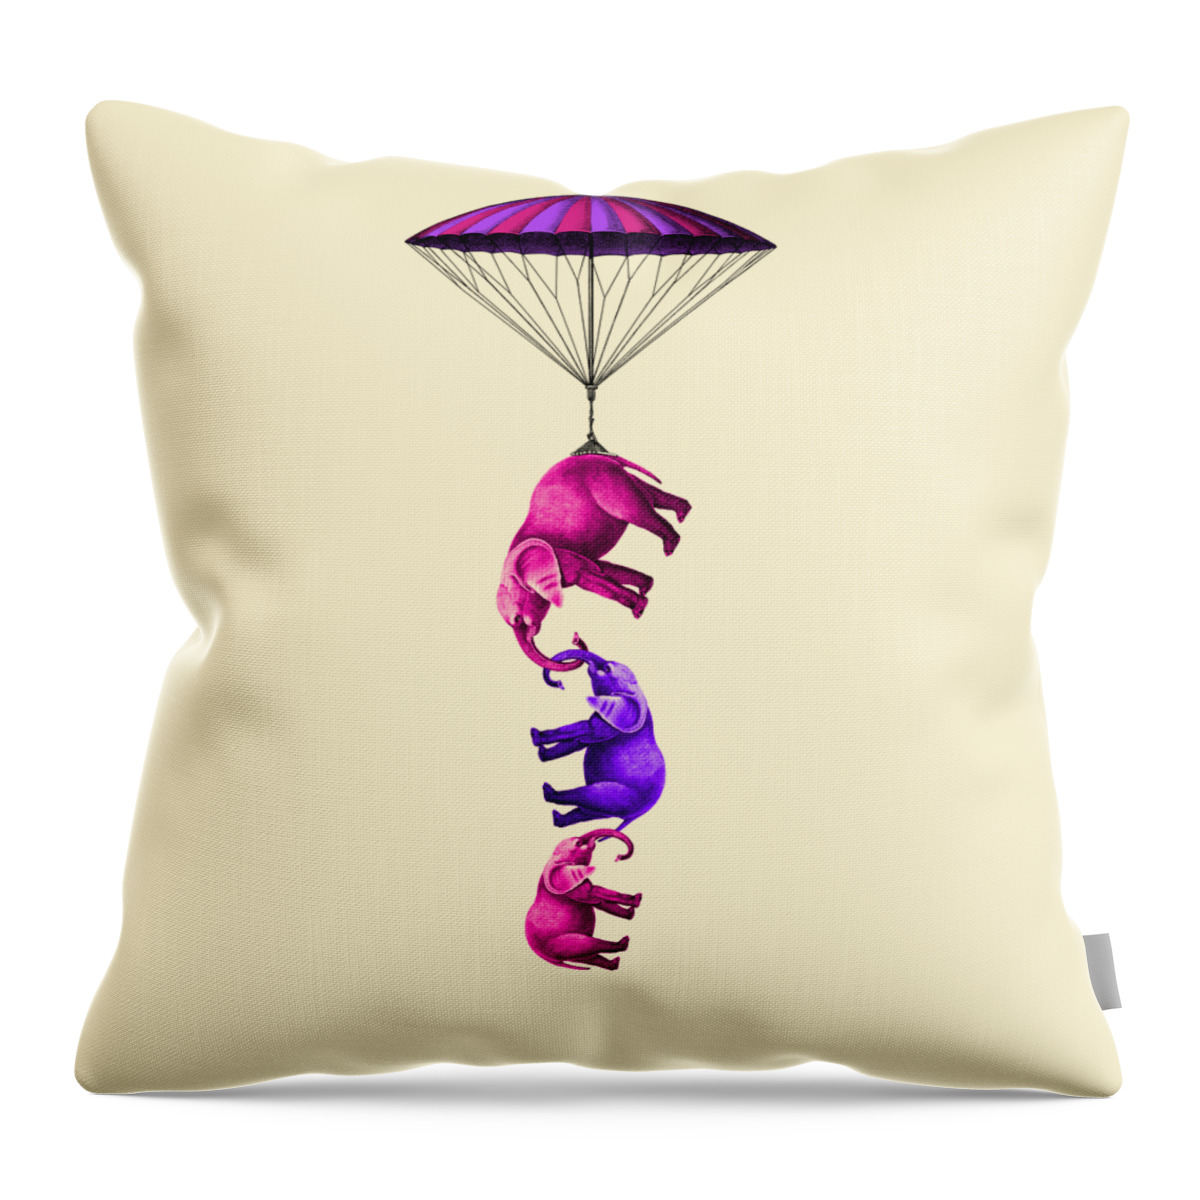 Elephant Throw Pillow featuring the digital art Flying elephants in pink and purple by Madame Memento